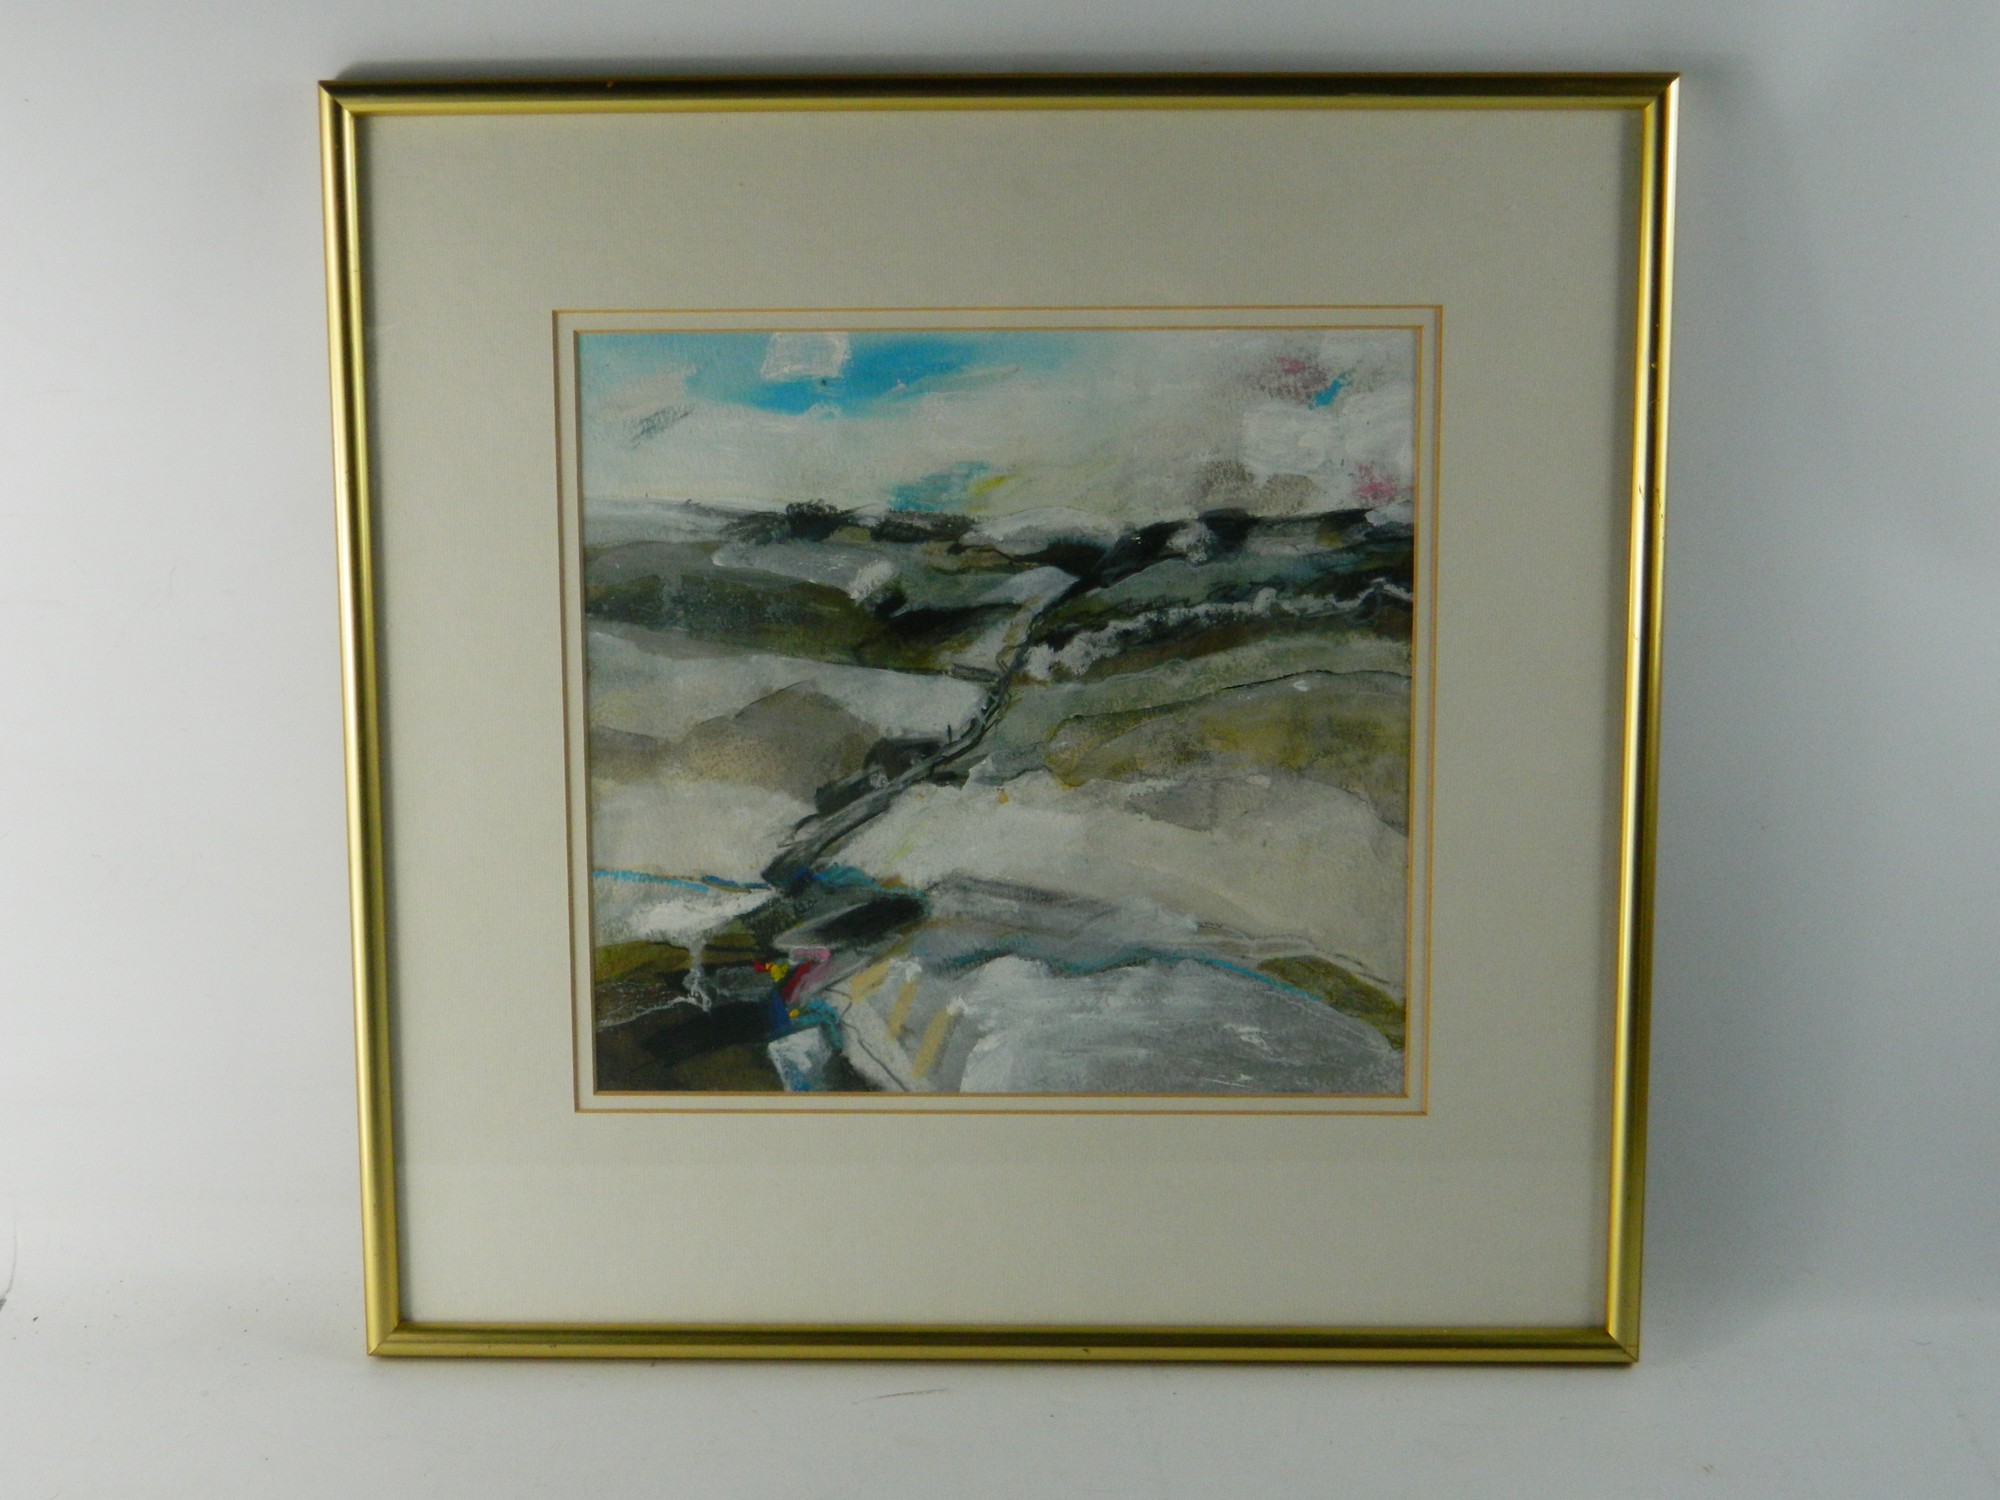 DOUGLAS DAVIES 'Winter' framed mixed media, signature faint dated 1993. Frame 43.5 by 45cm and mount - Image 2 of 4